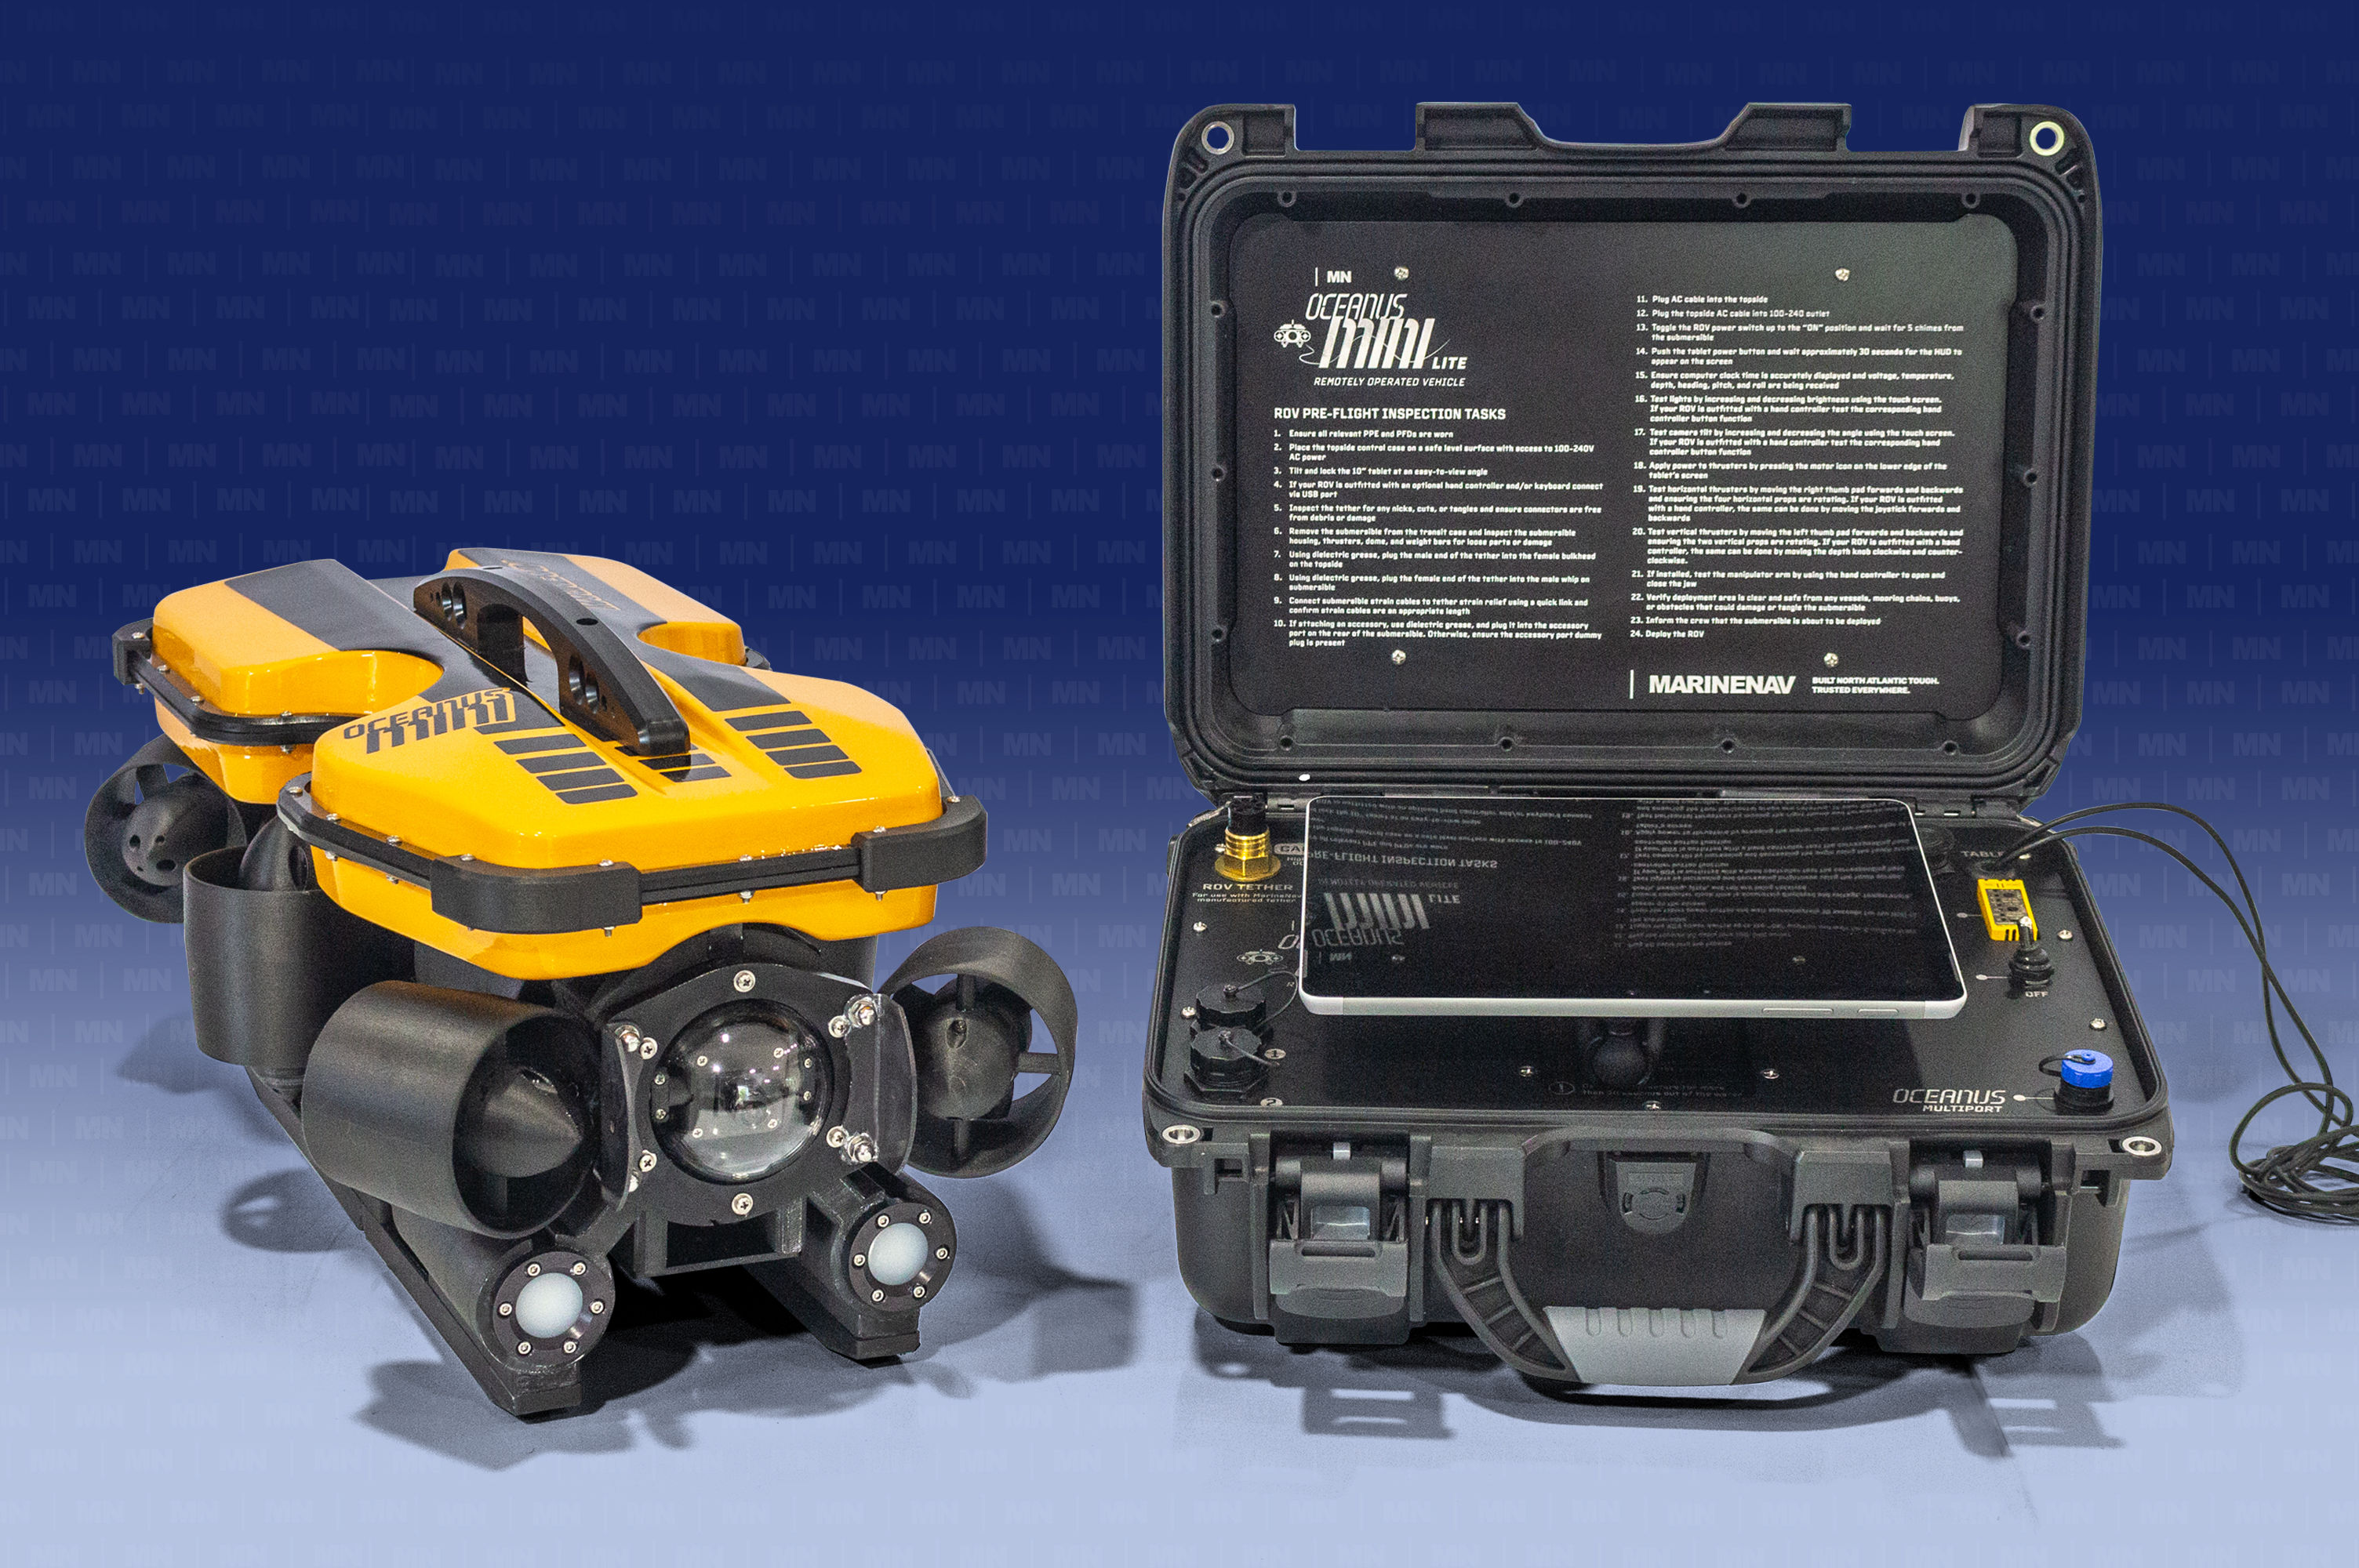 Mission ready ROV systems delivered in IP rated hardshell cases. Connect system in minutes and easily deployed by a single person